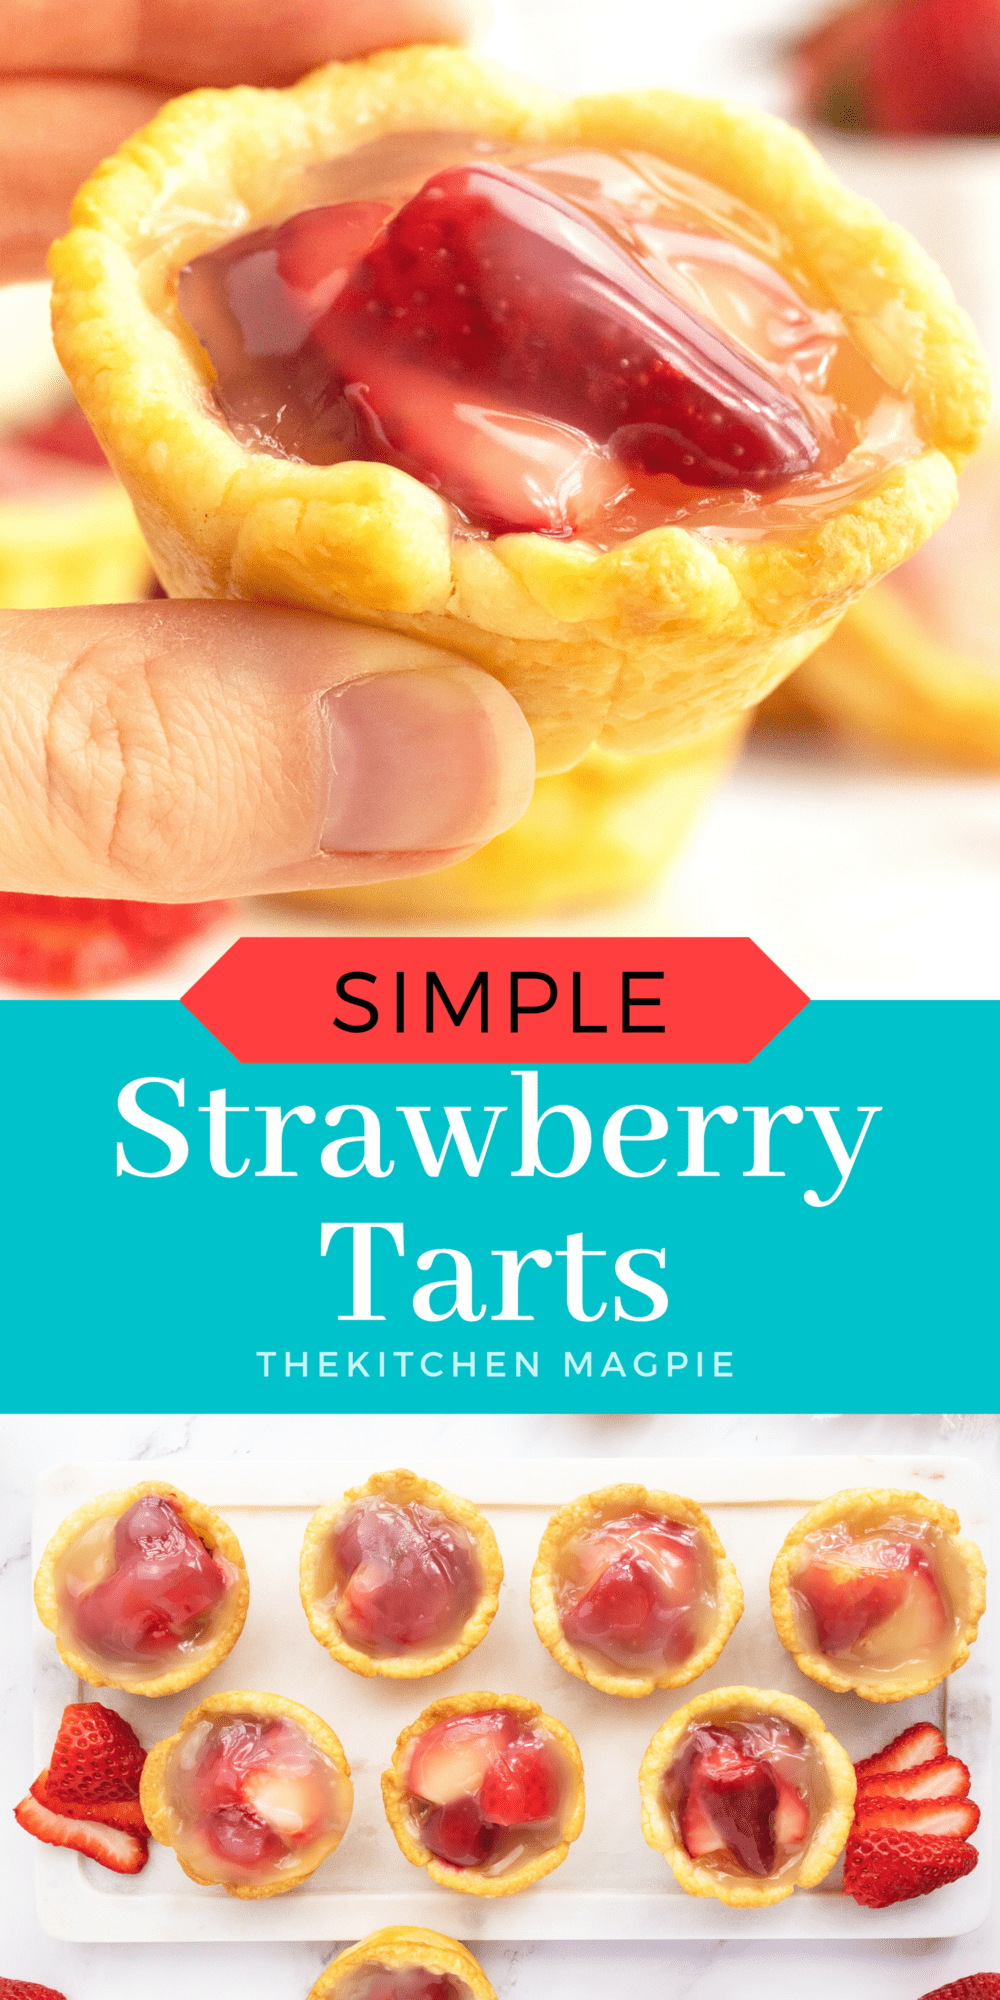 These sweet Strawberry Tarts are a perfect summer treat that your guests are sure to enjoy